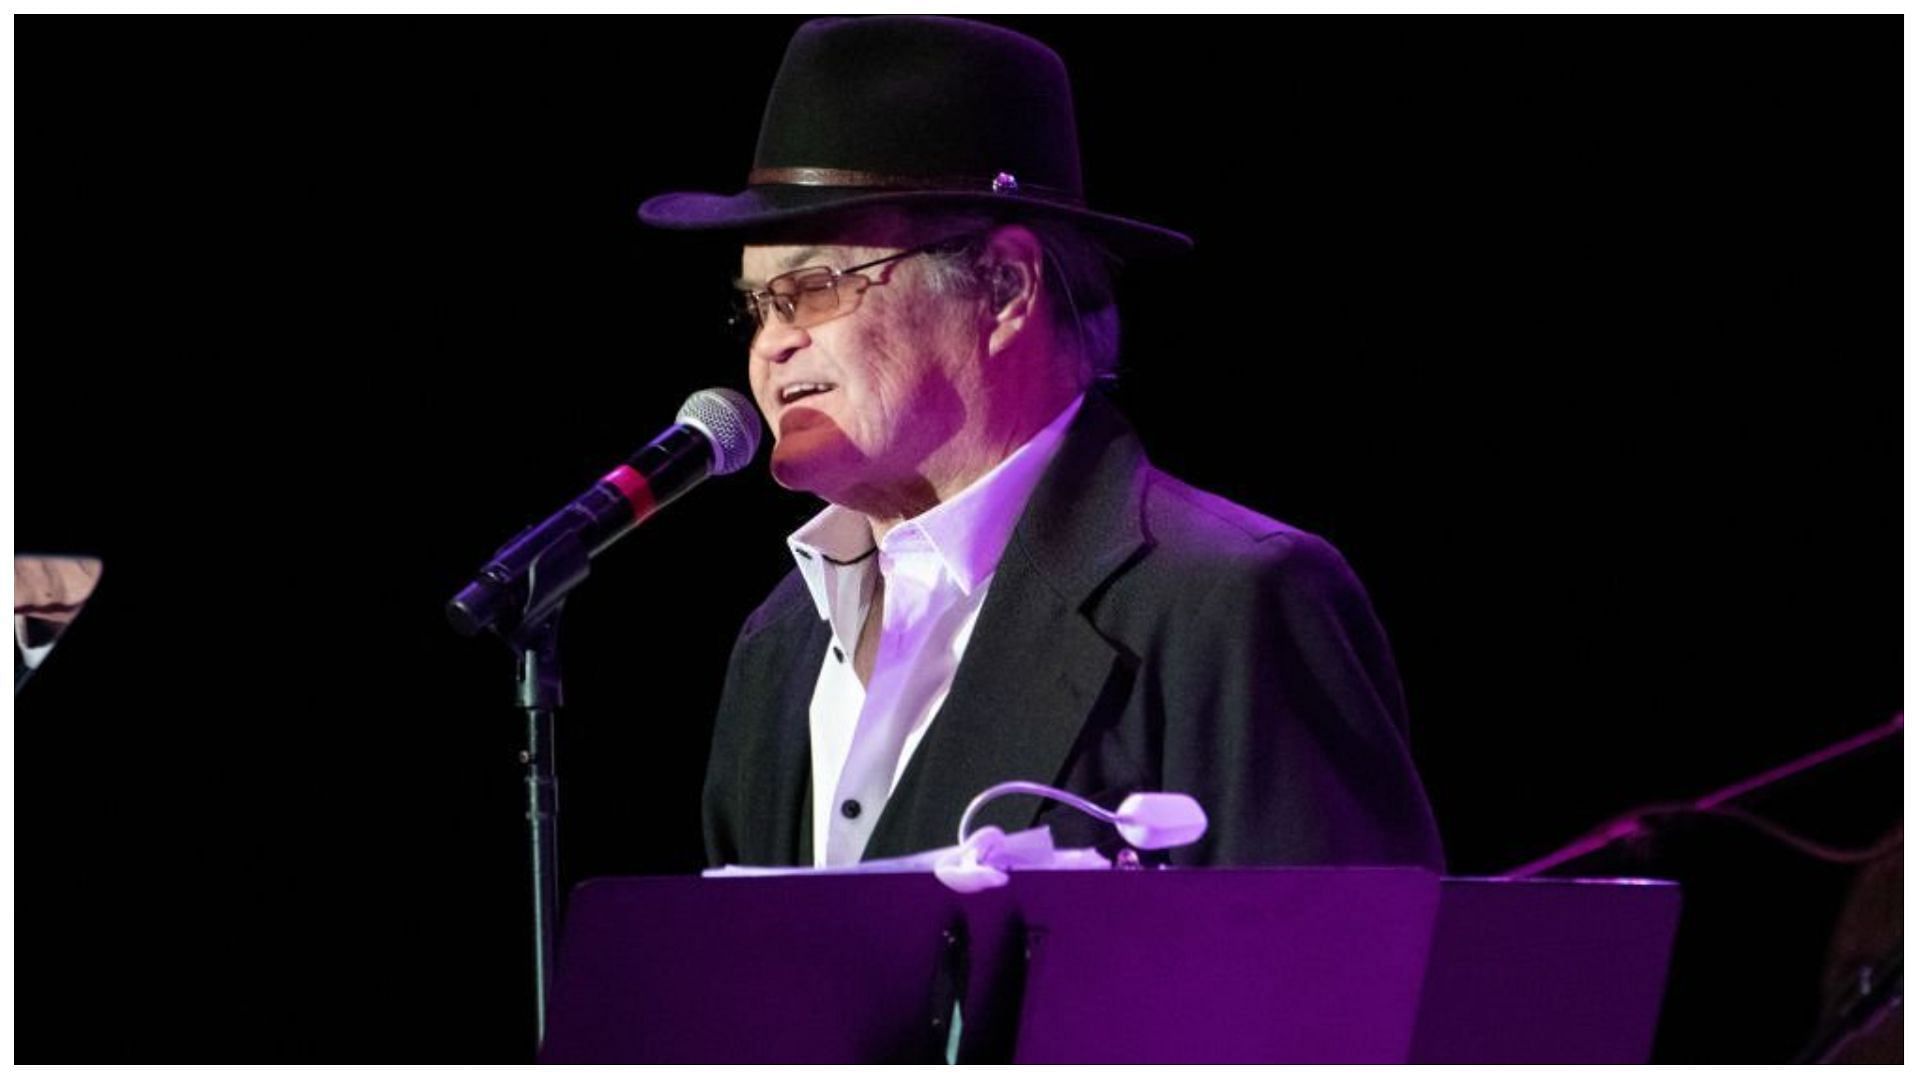 Micky Dolenz became a part of The Monkees in 1965 (Image via Scott Dudelson/Getty Images)